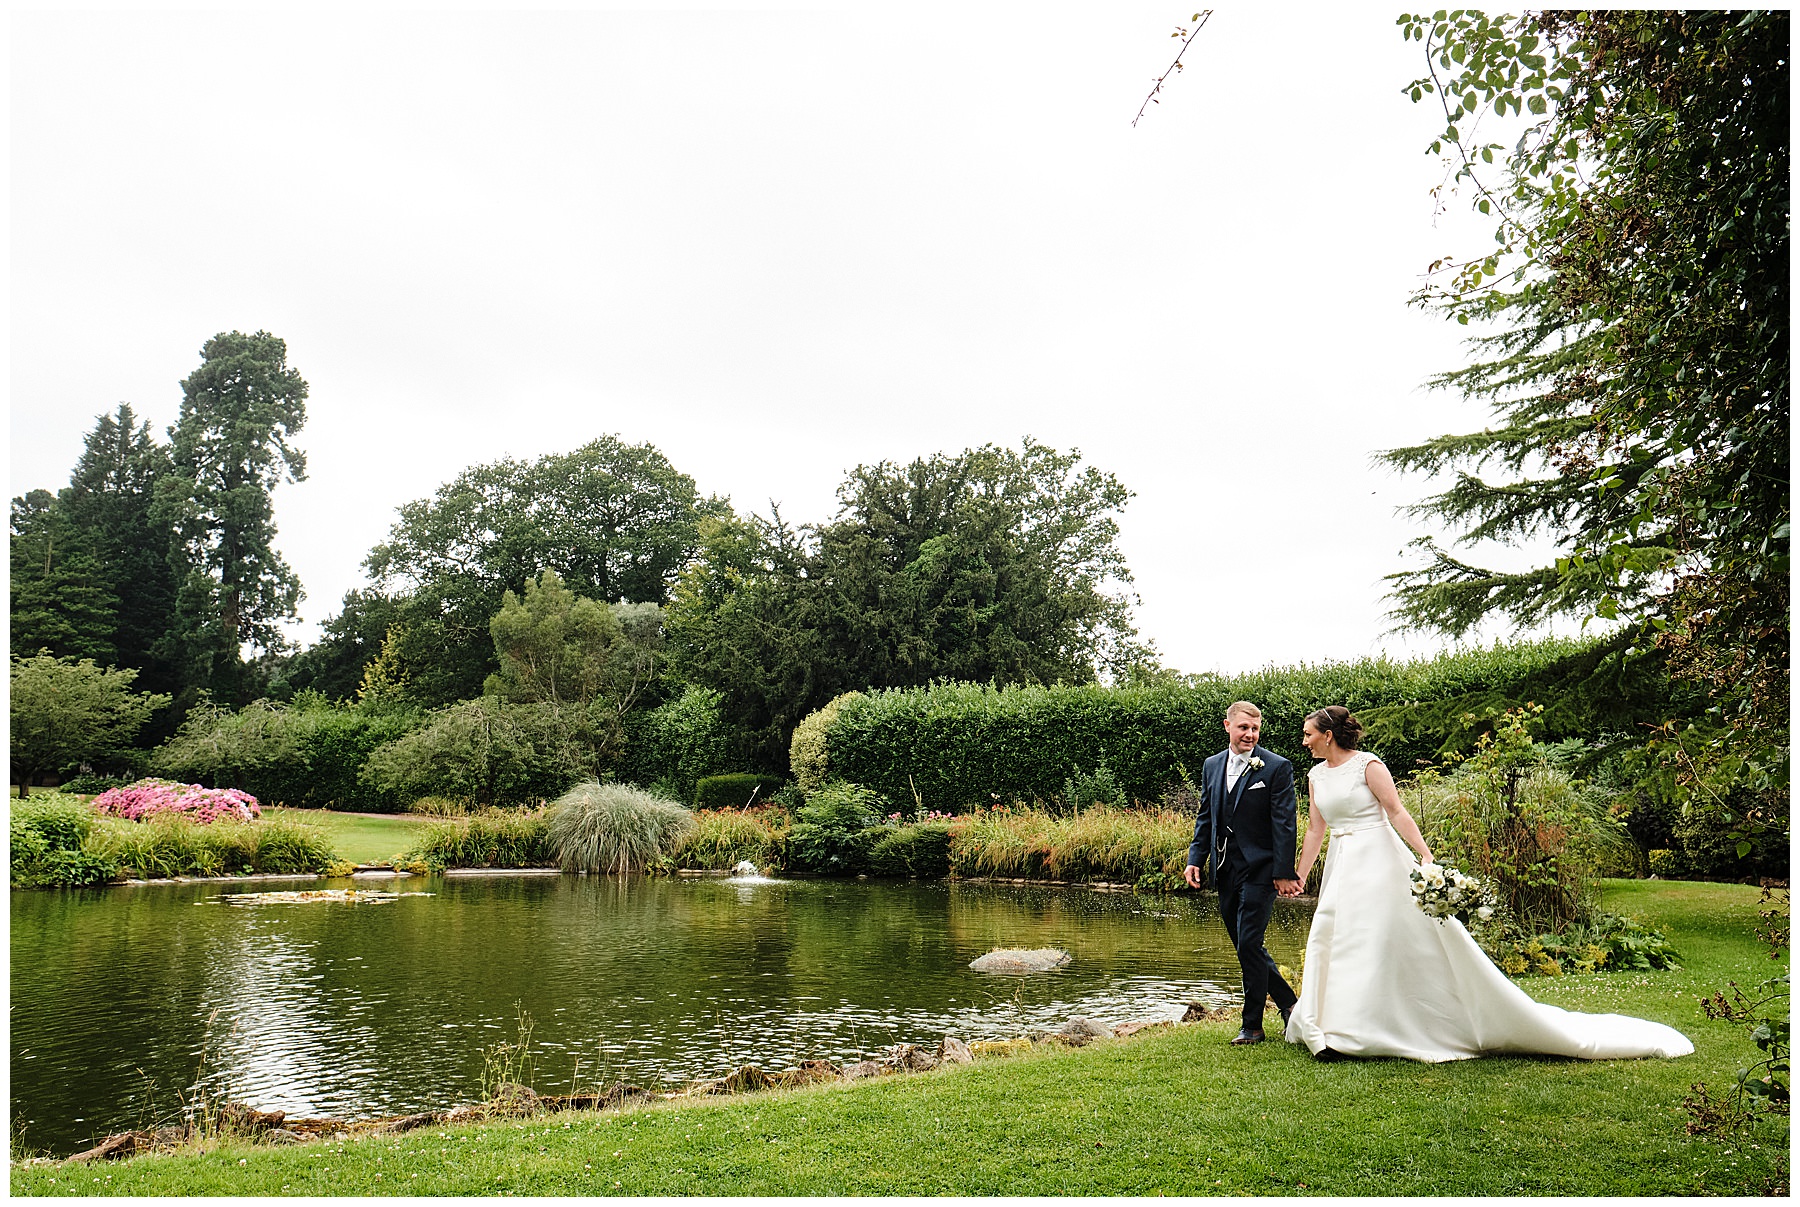 Natural portraits of the bride and groom around the beautiful gardens at Hawkstone Hall in Shrewsbury by Documentary Wedding Photographer Stuart James